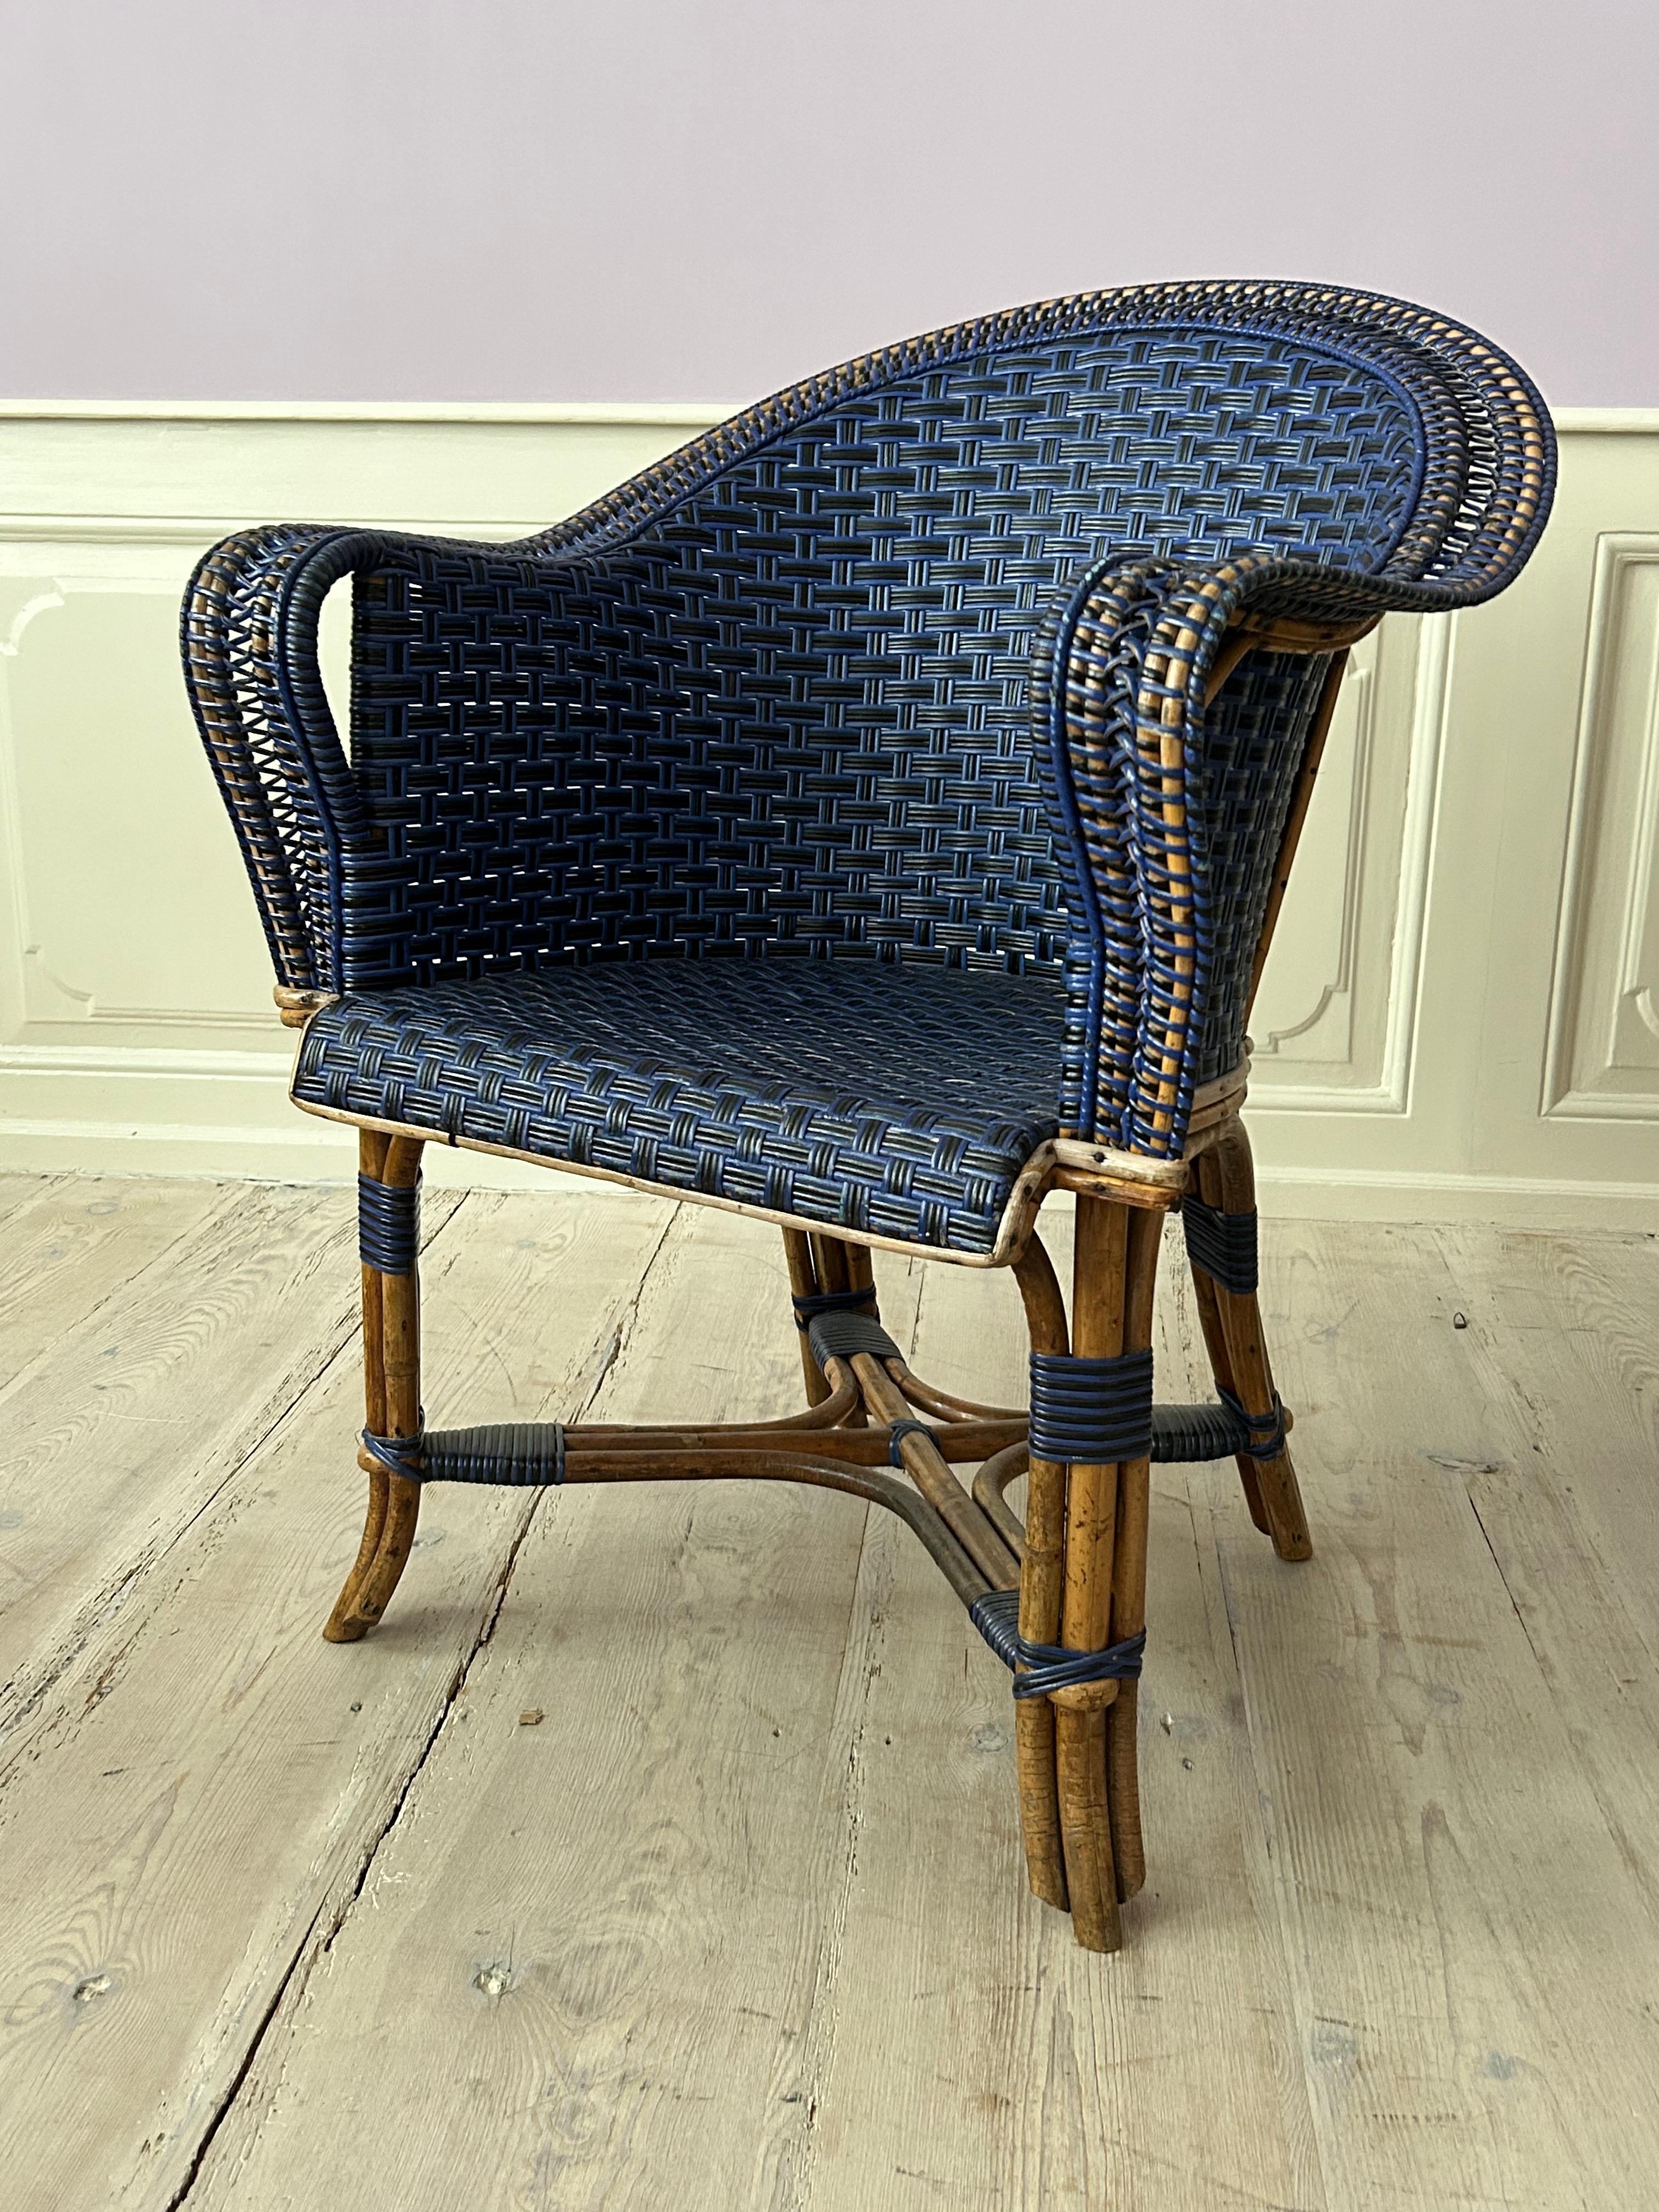 Vintage Pair of Armchairs in Blue and Black Rattan, France, Early 20th Century For Sale 4